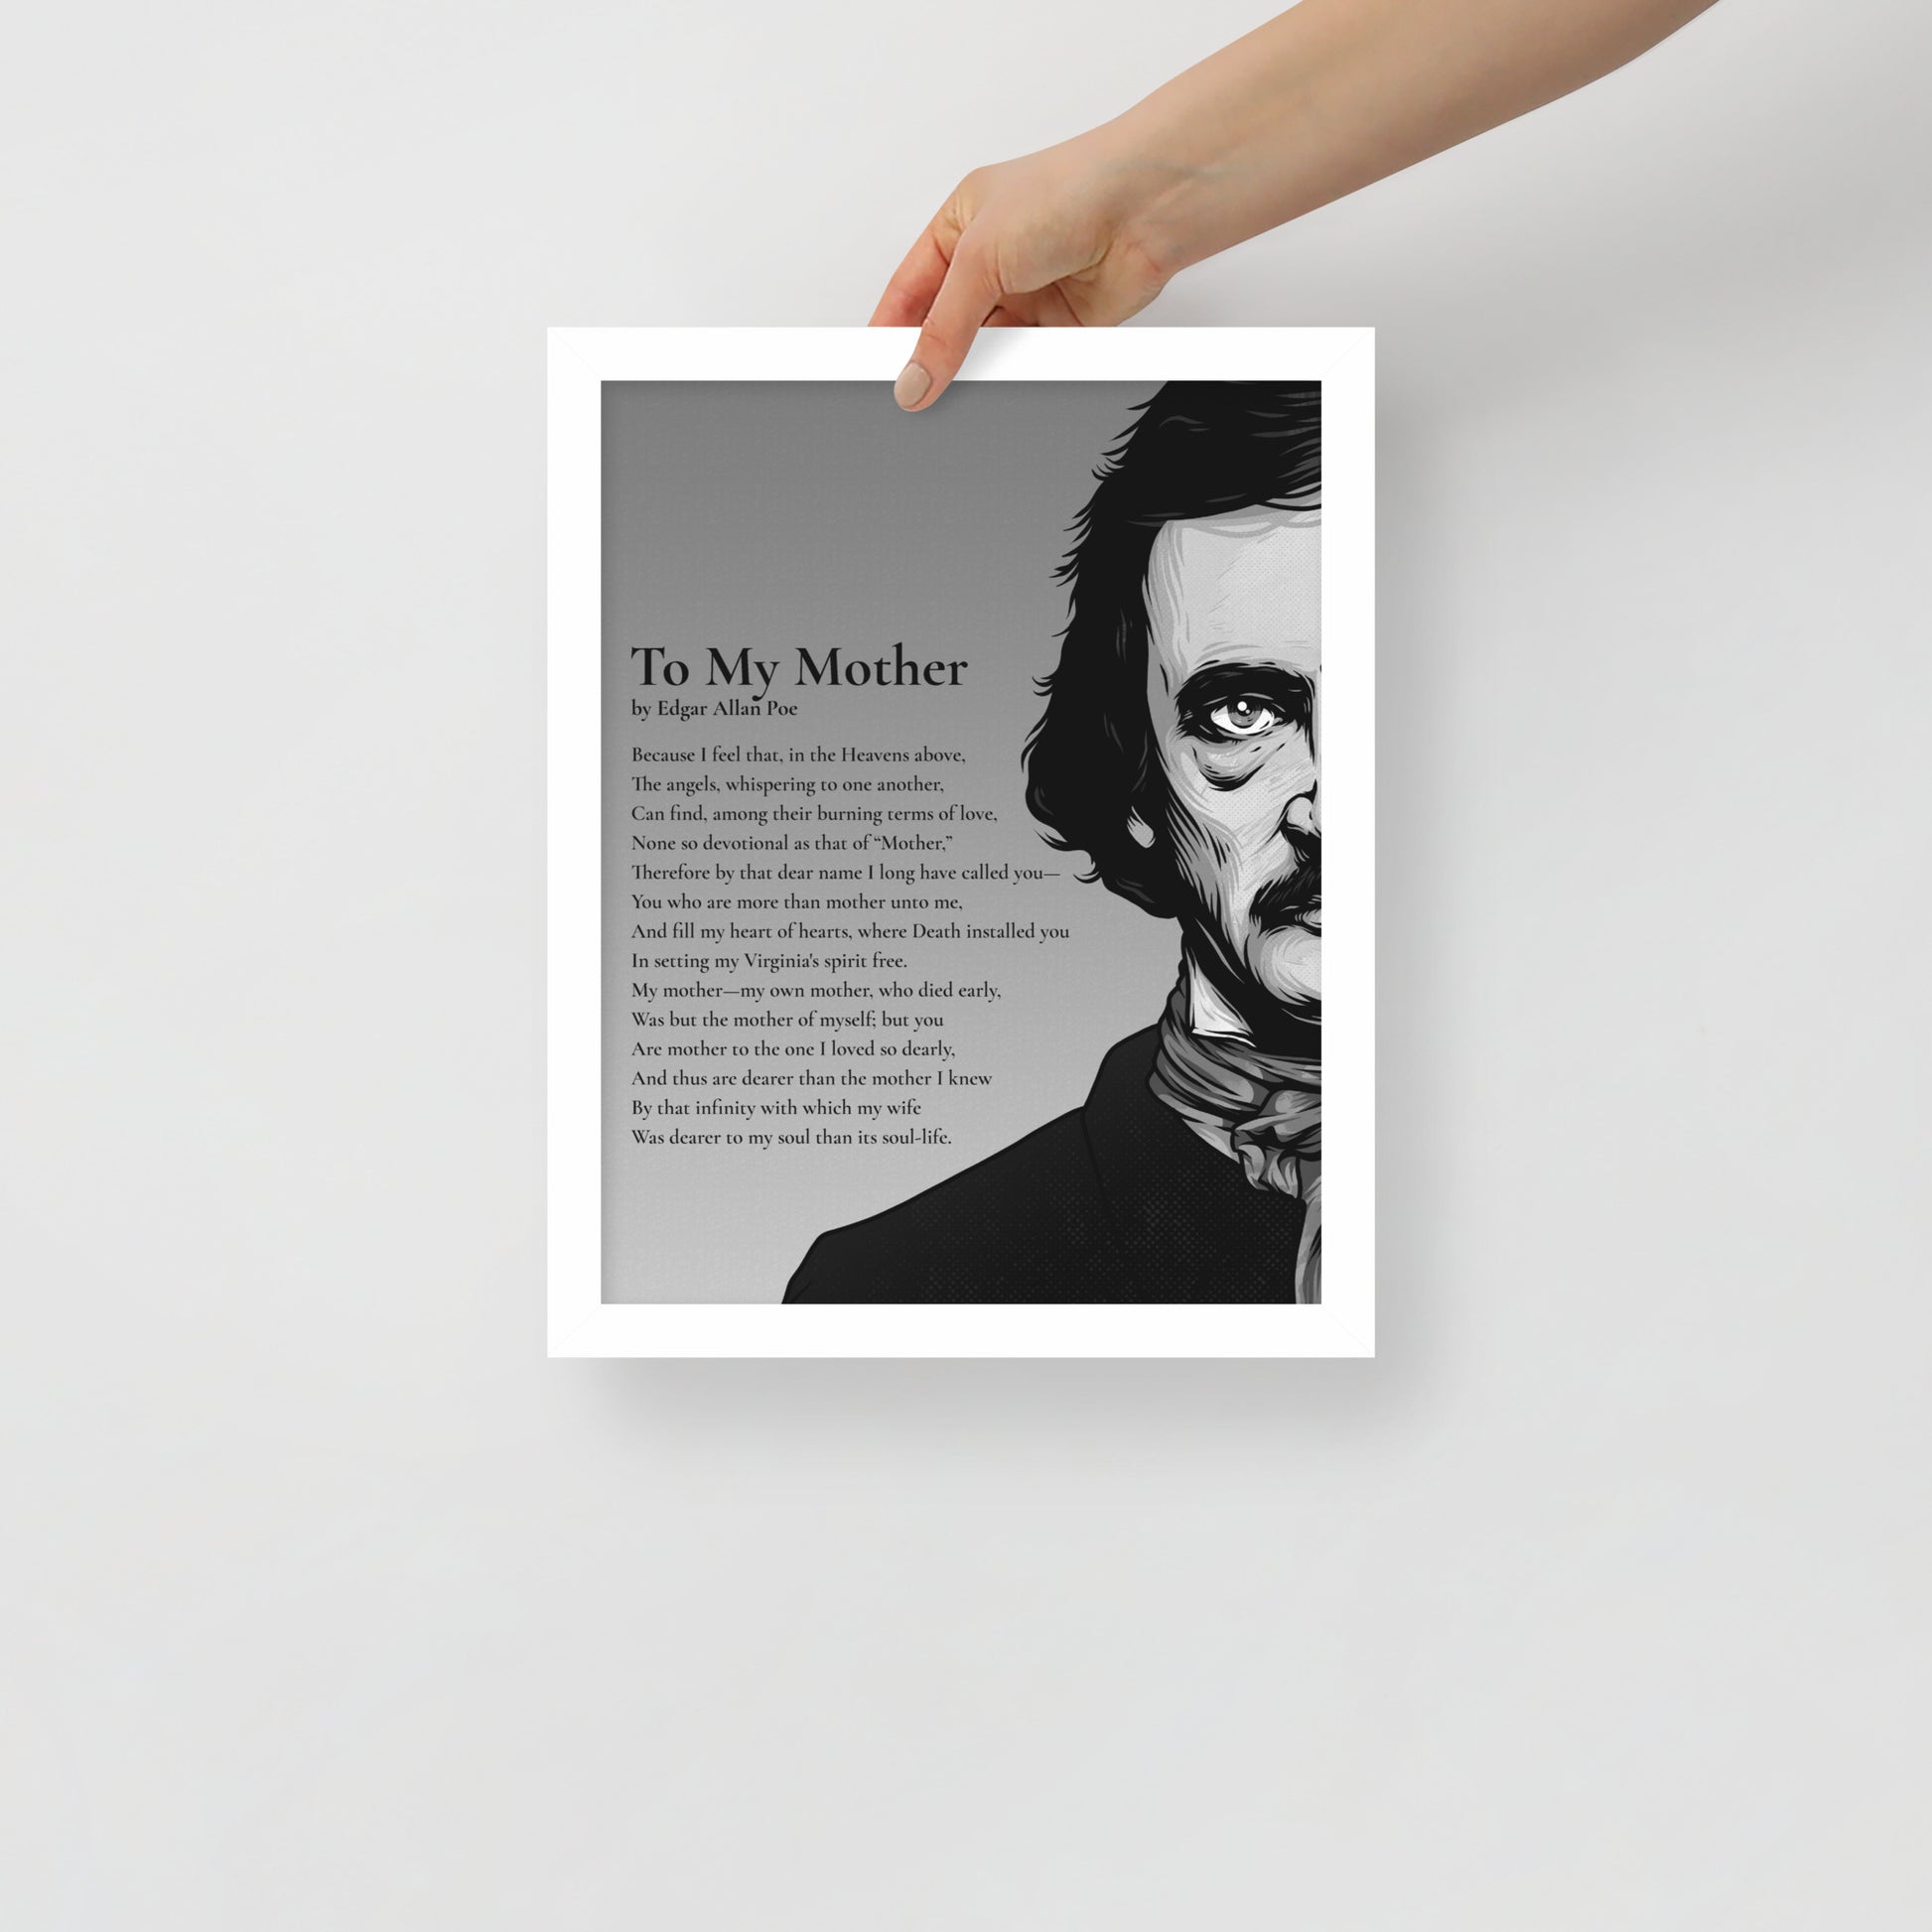 Edgar Allan Poe's 'To My Mother' Framed Matted Poster - 11 x 14 White Frame